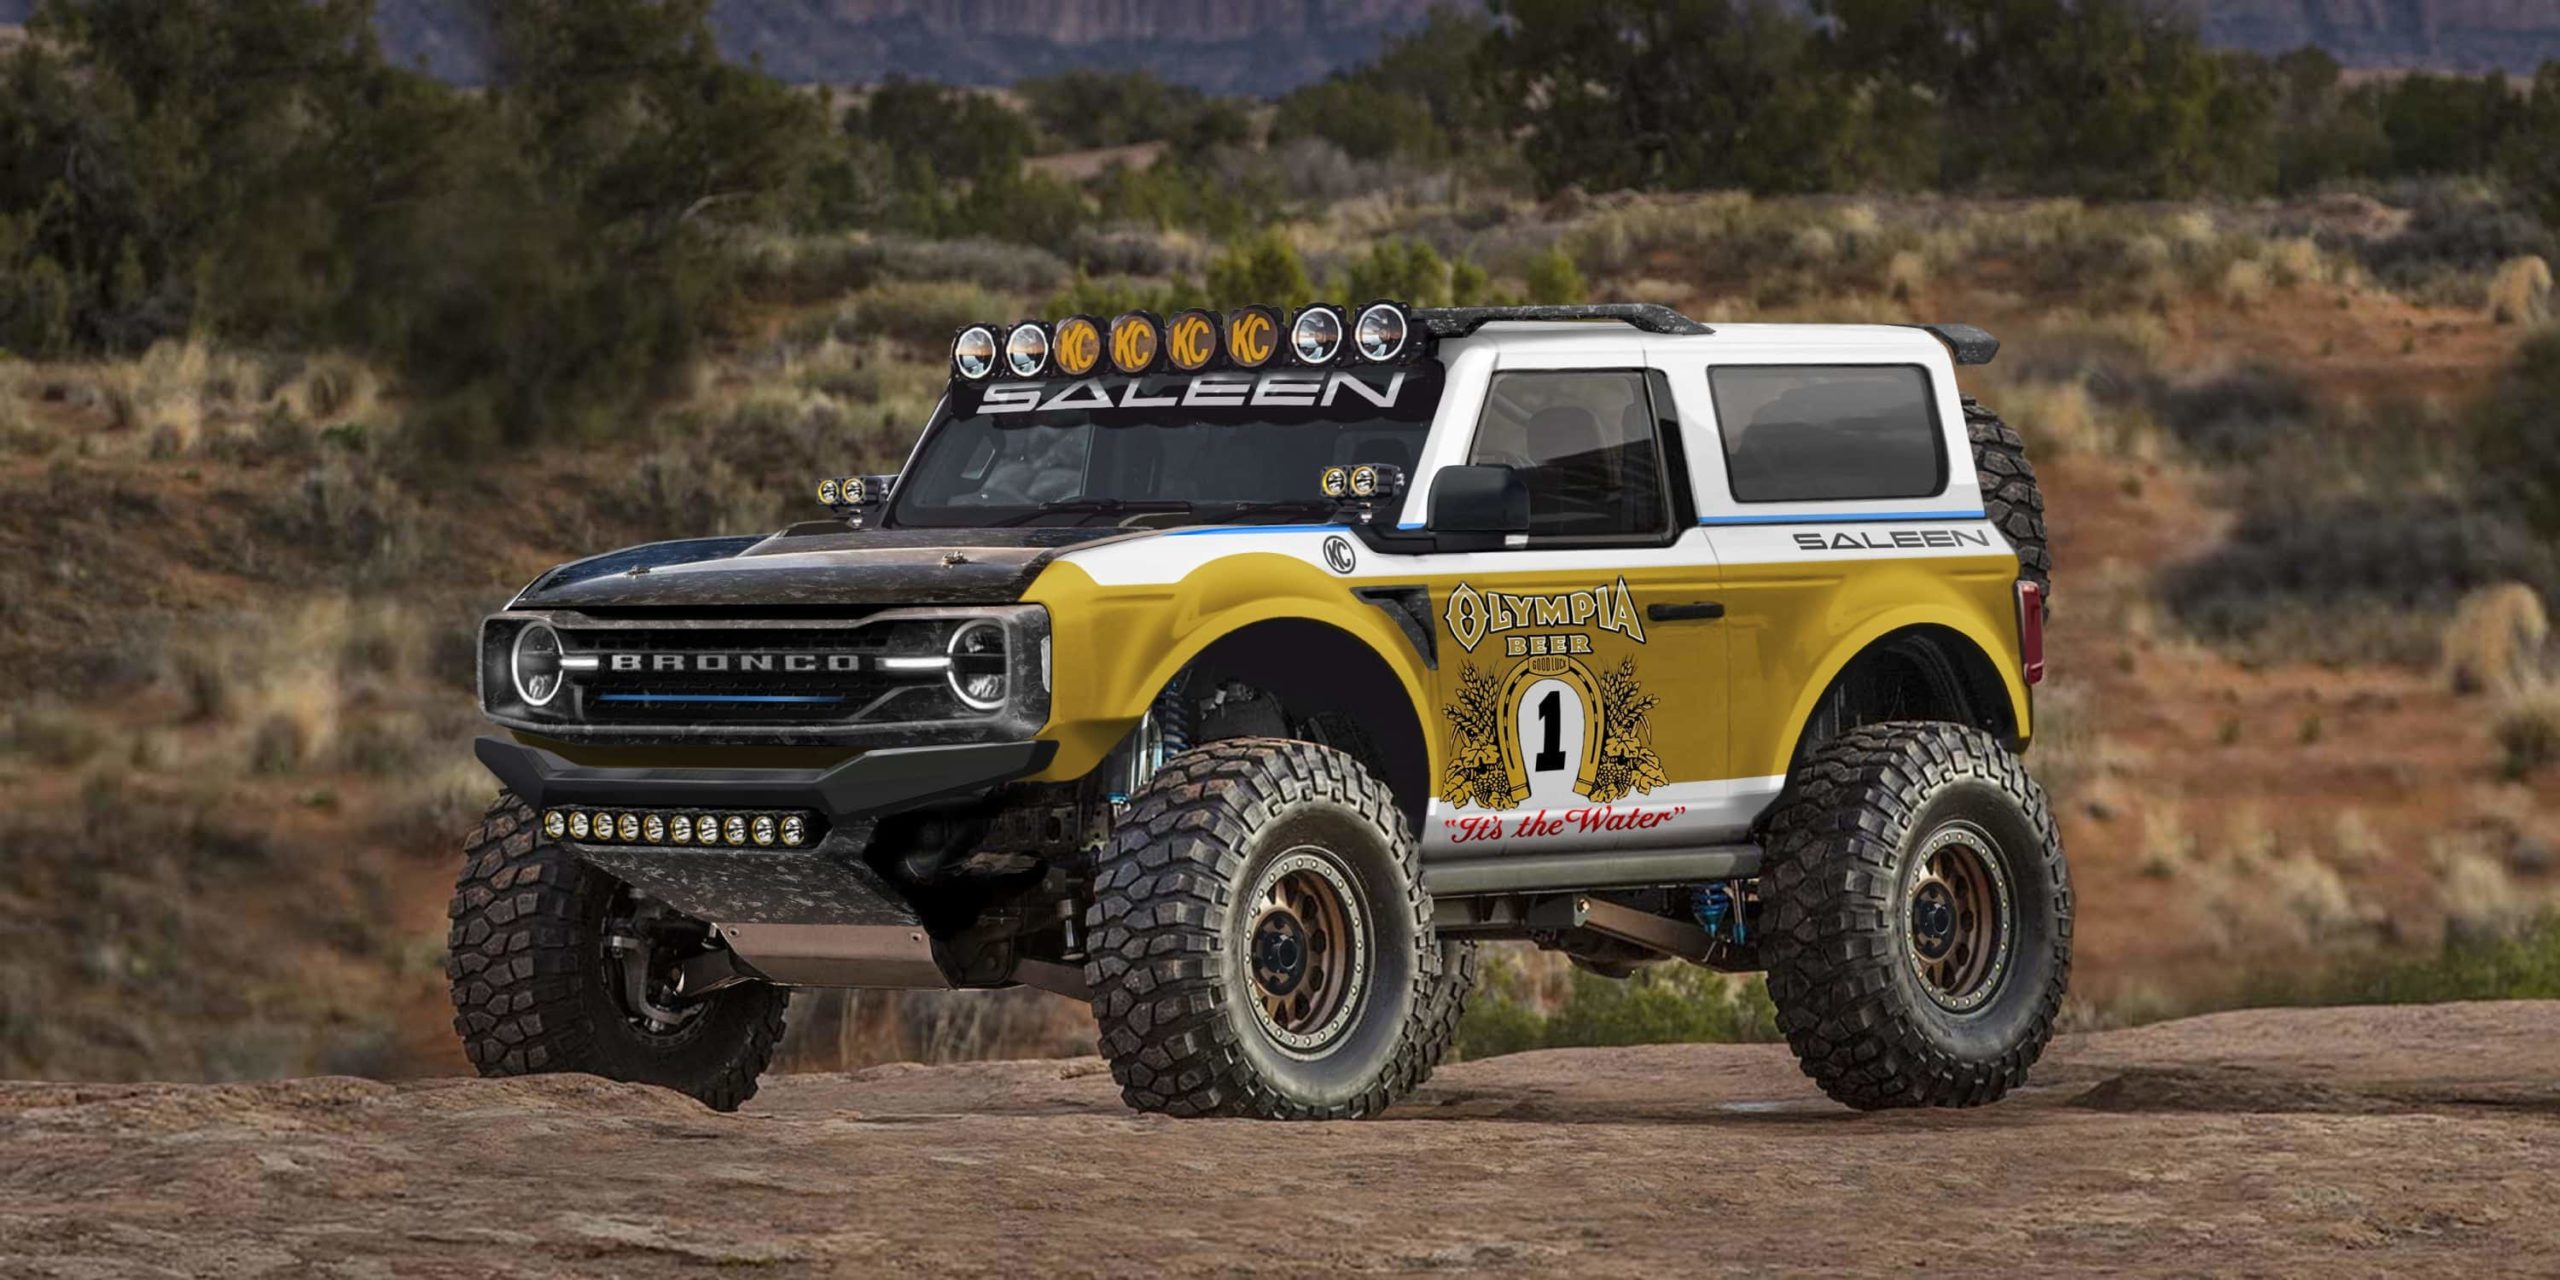 Saleen to Produce ‘Big Oly’ Bronco | THE SHOP